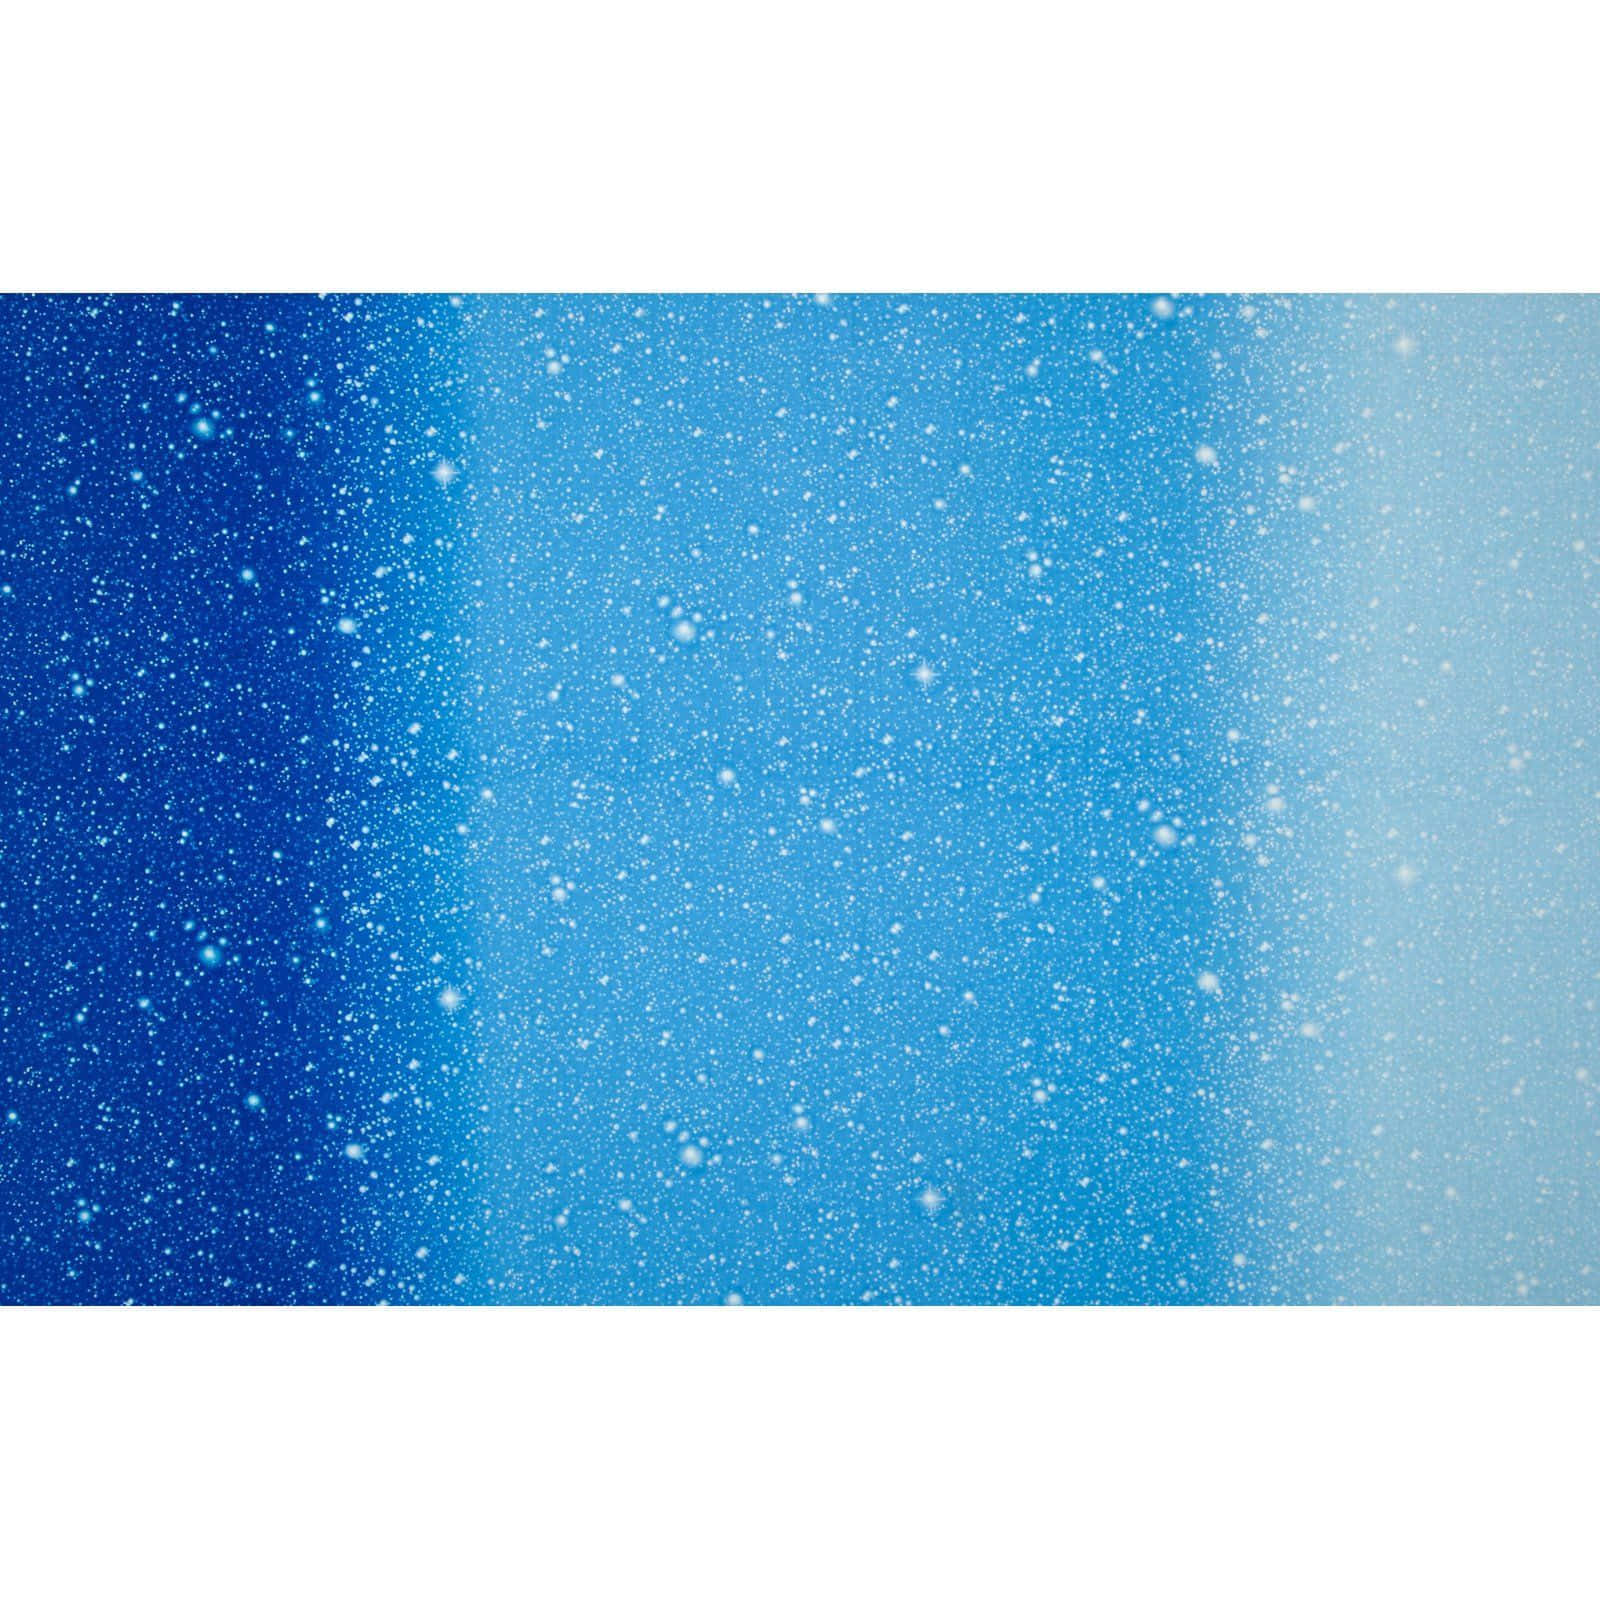 Blue Ombre Background Glittery Blue Tones